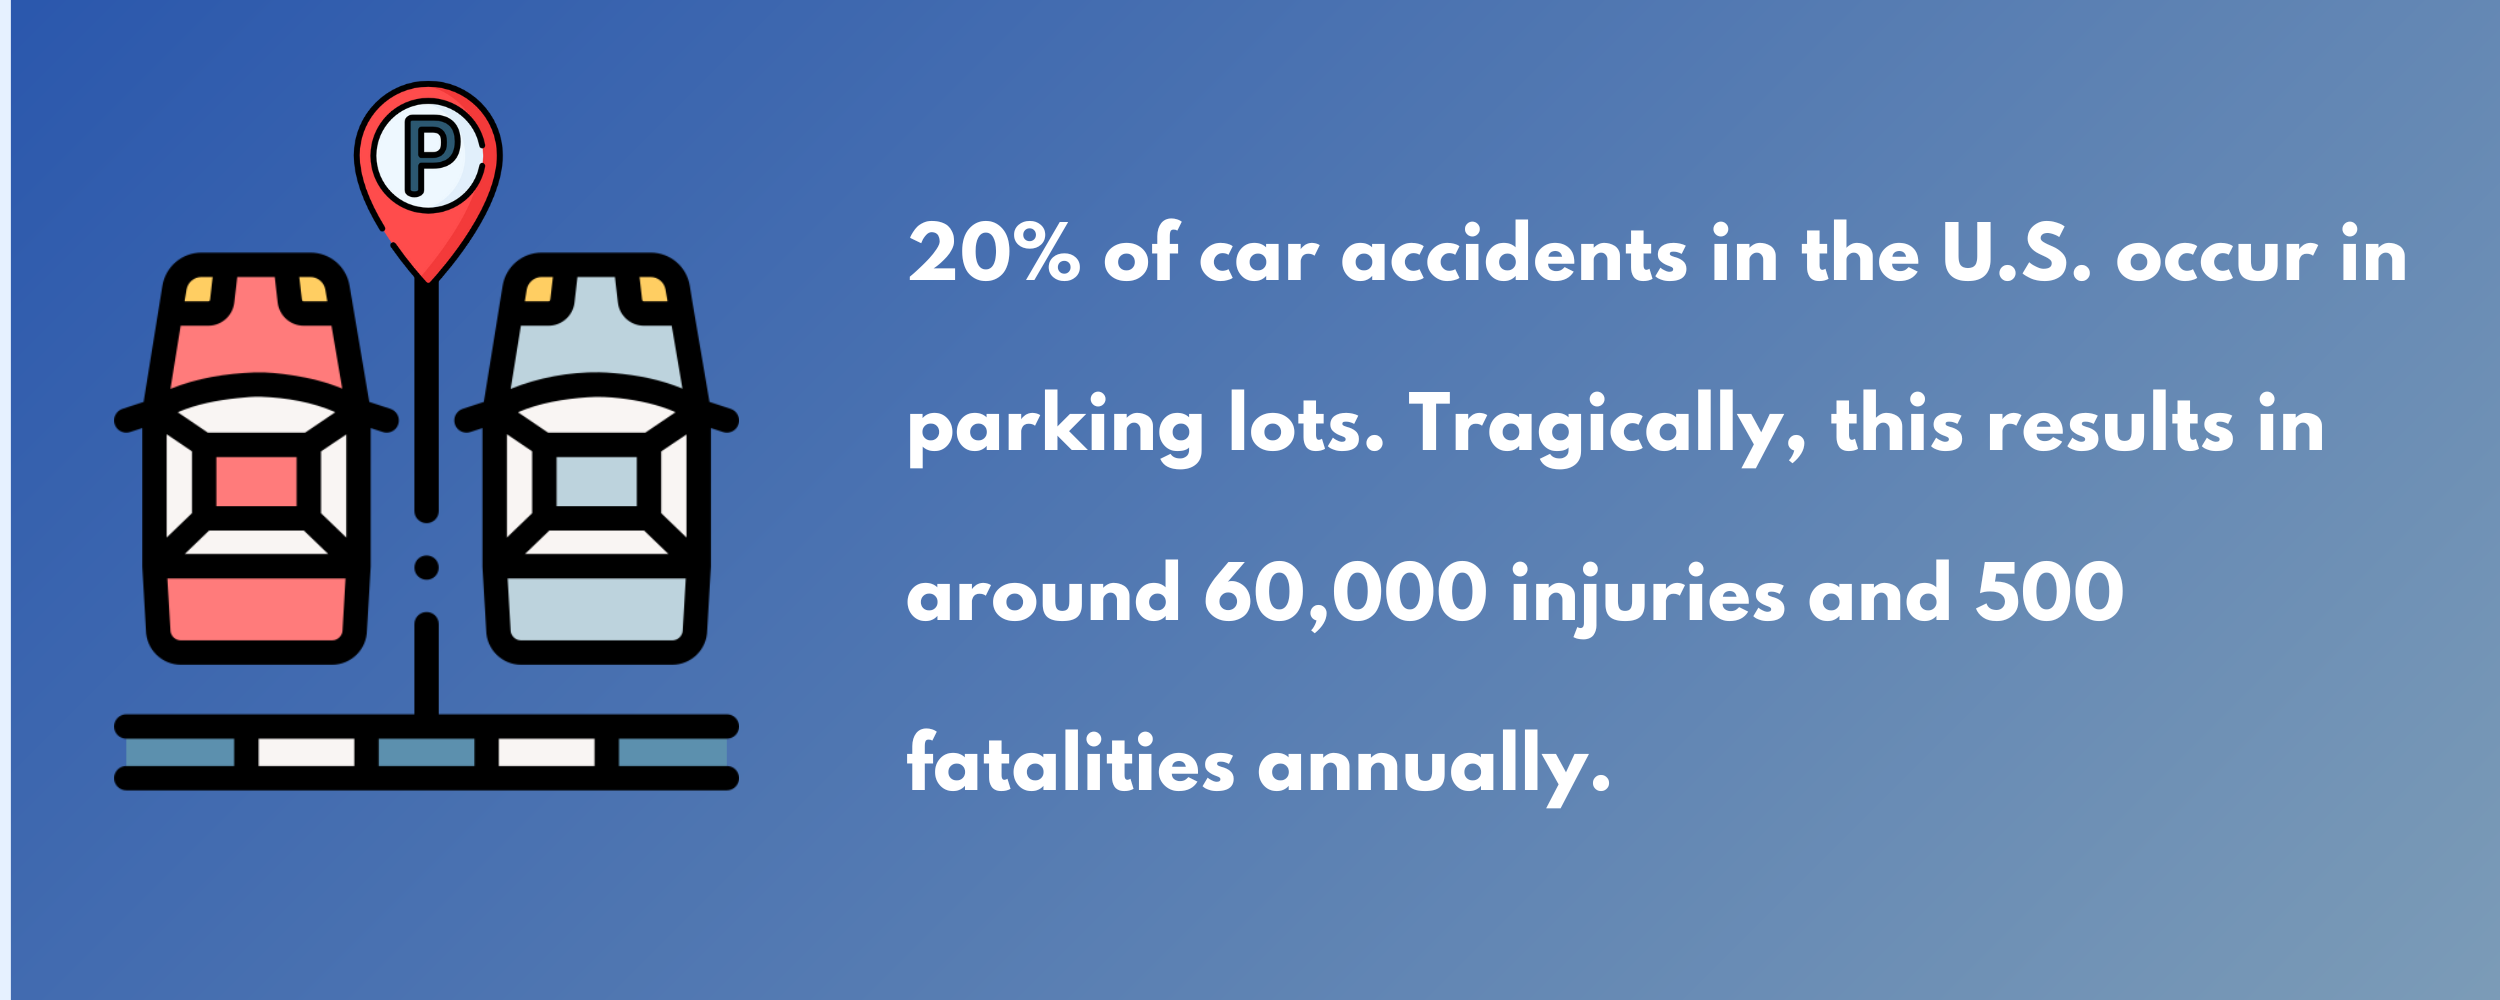 parking accident data injury and fatality rate